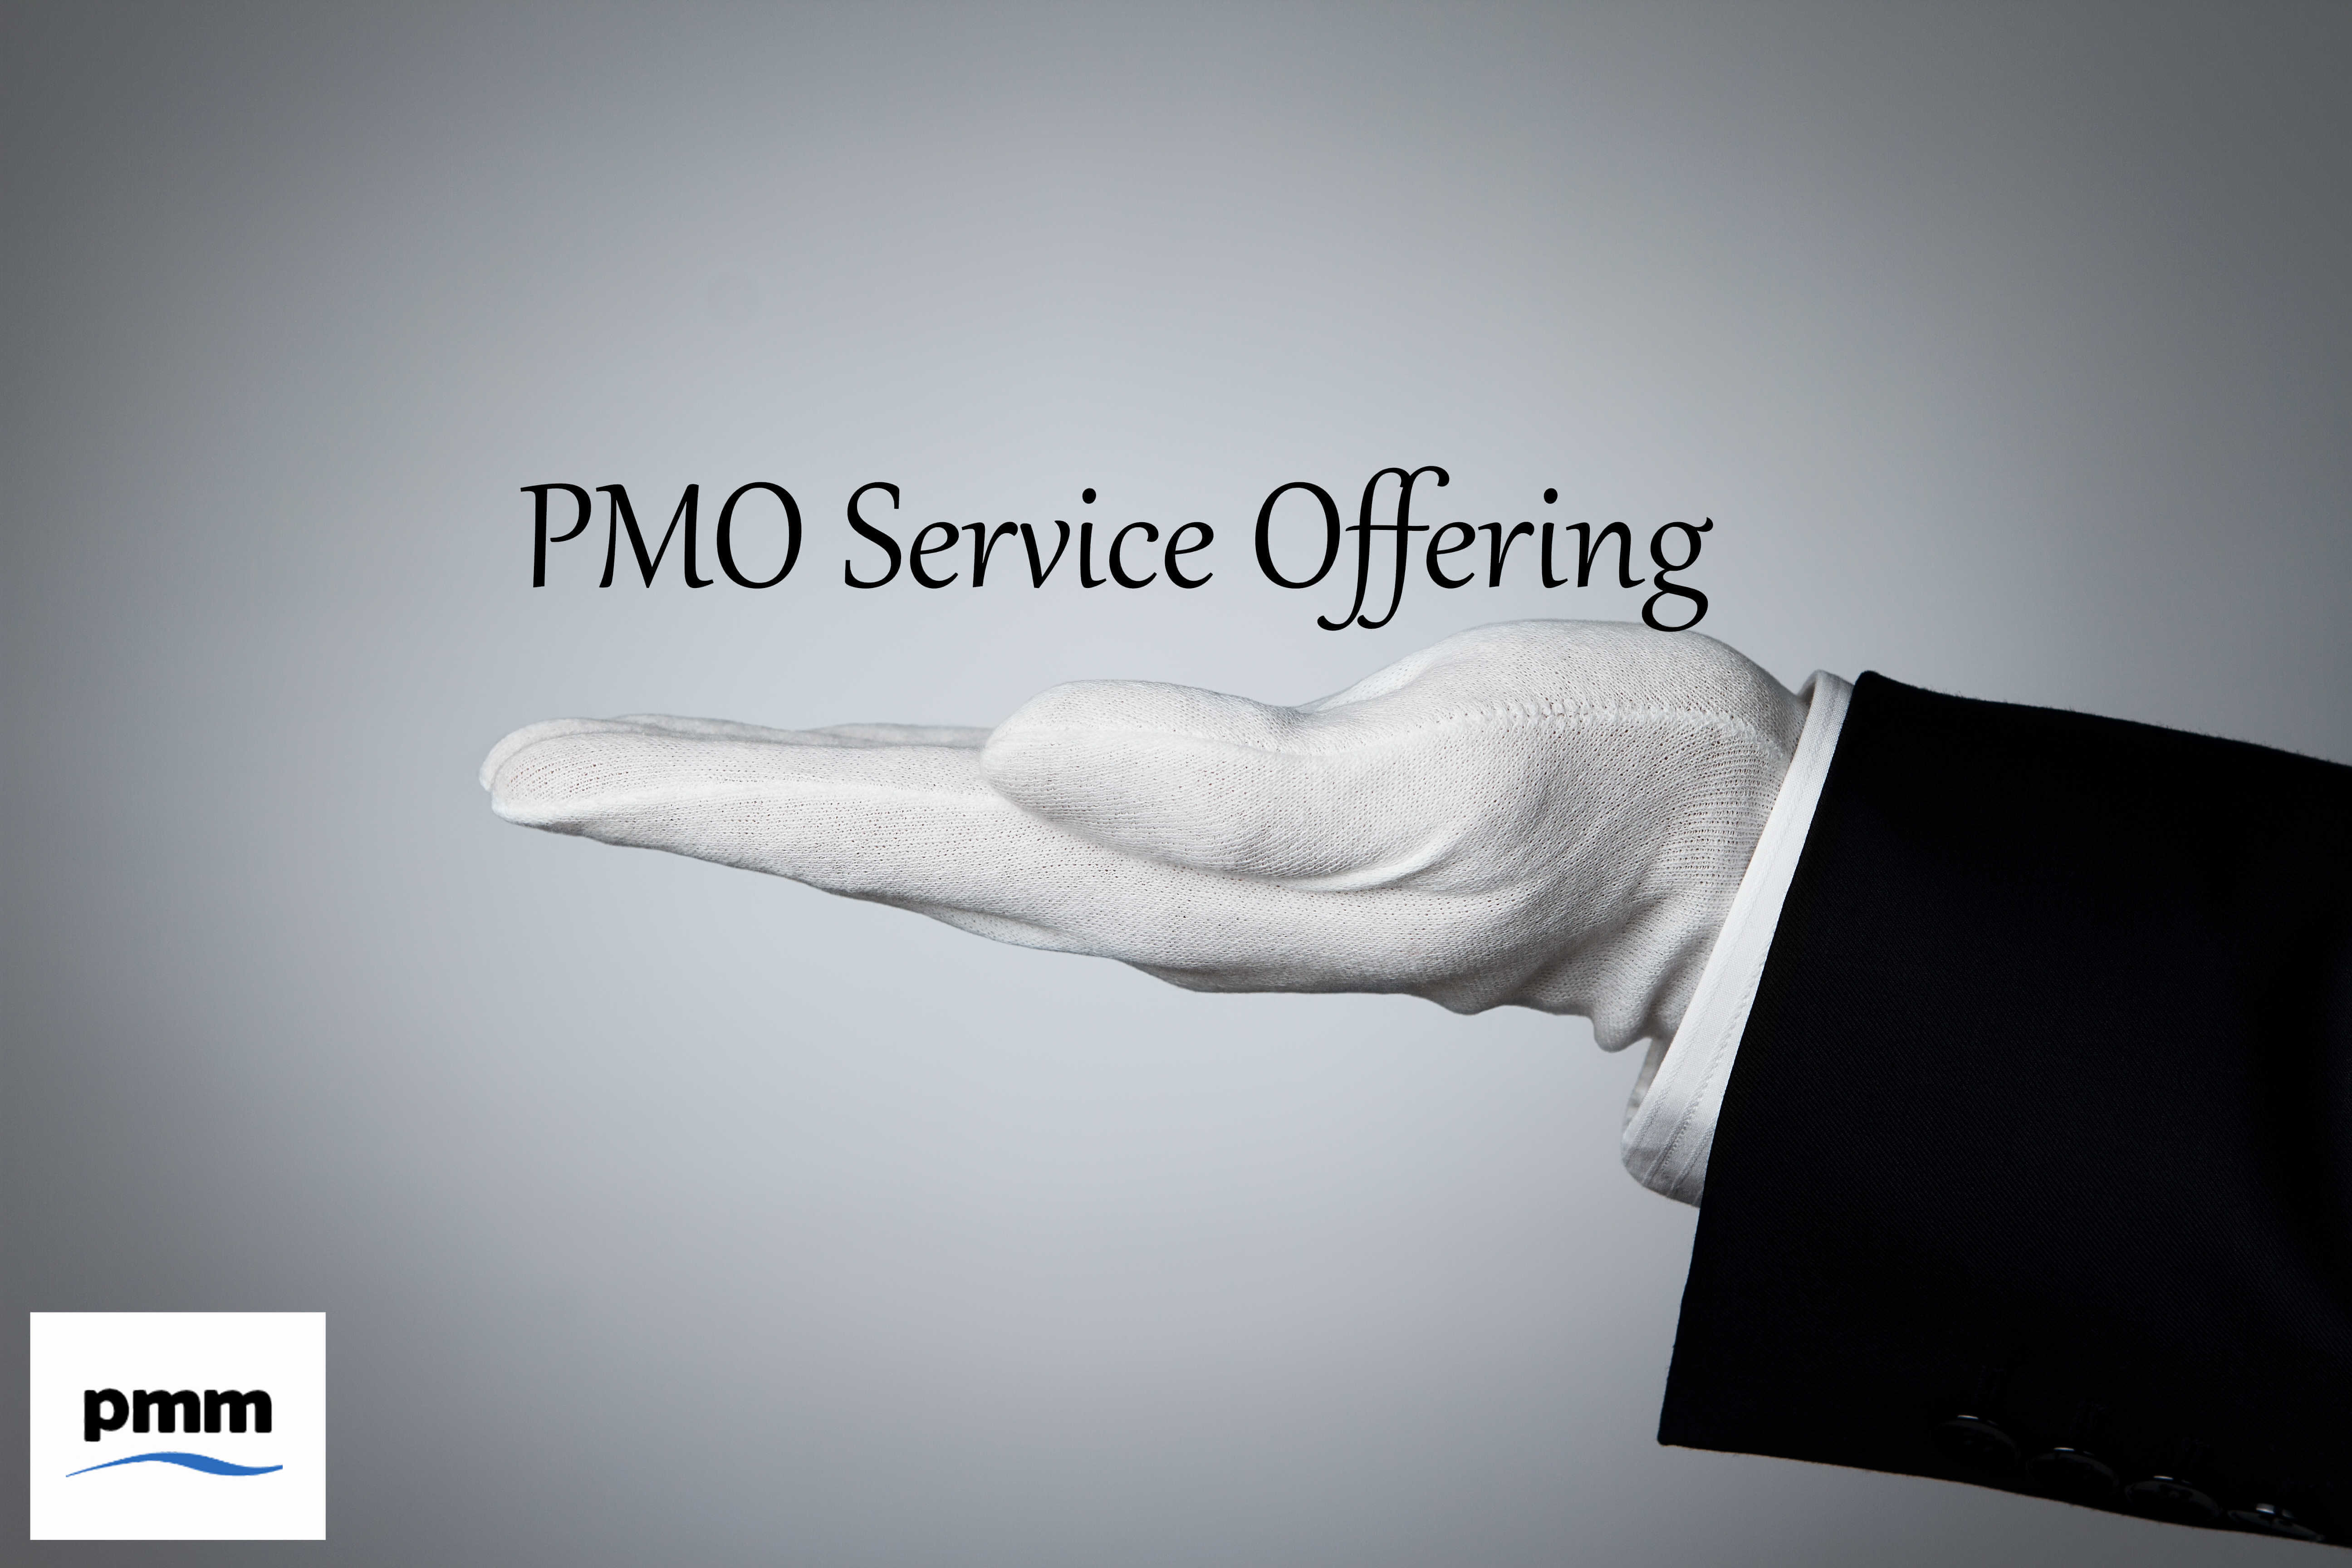 PMO service offering